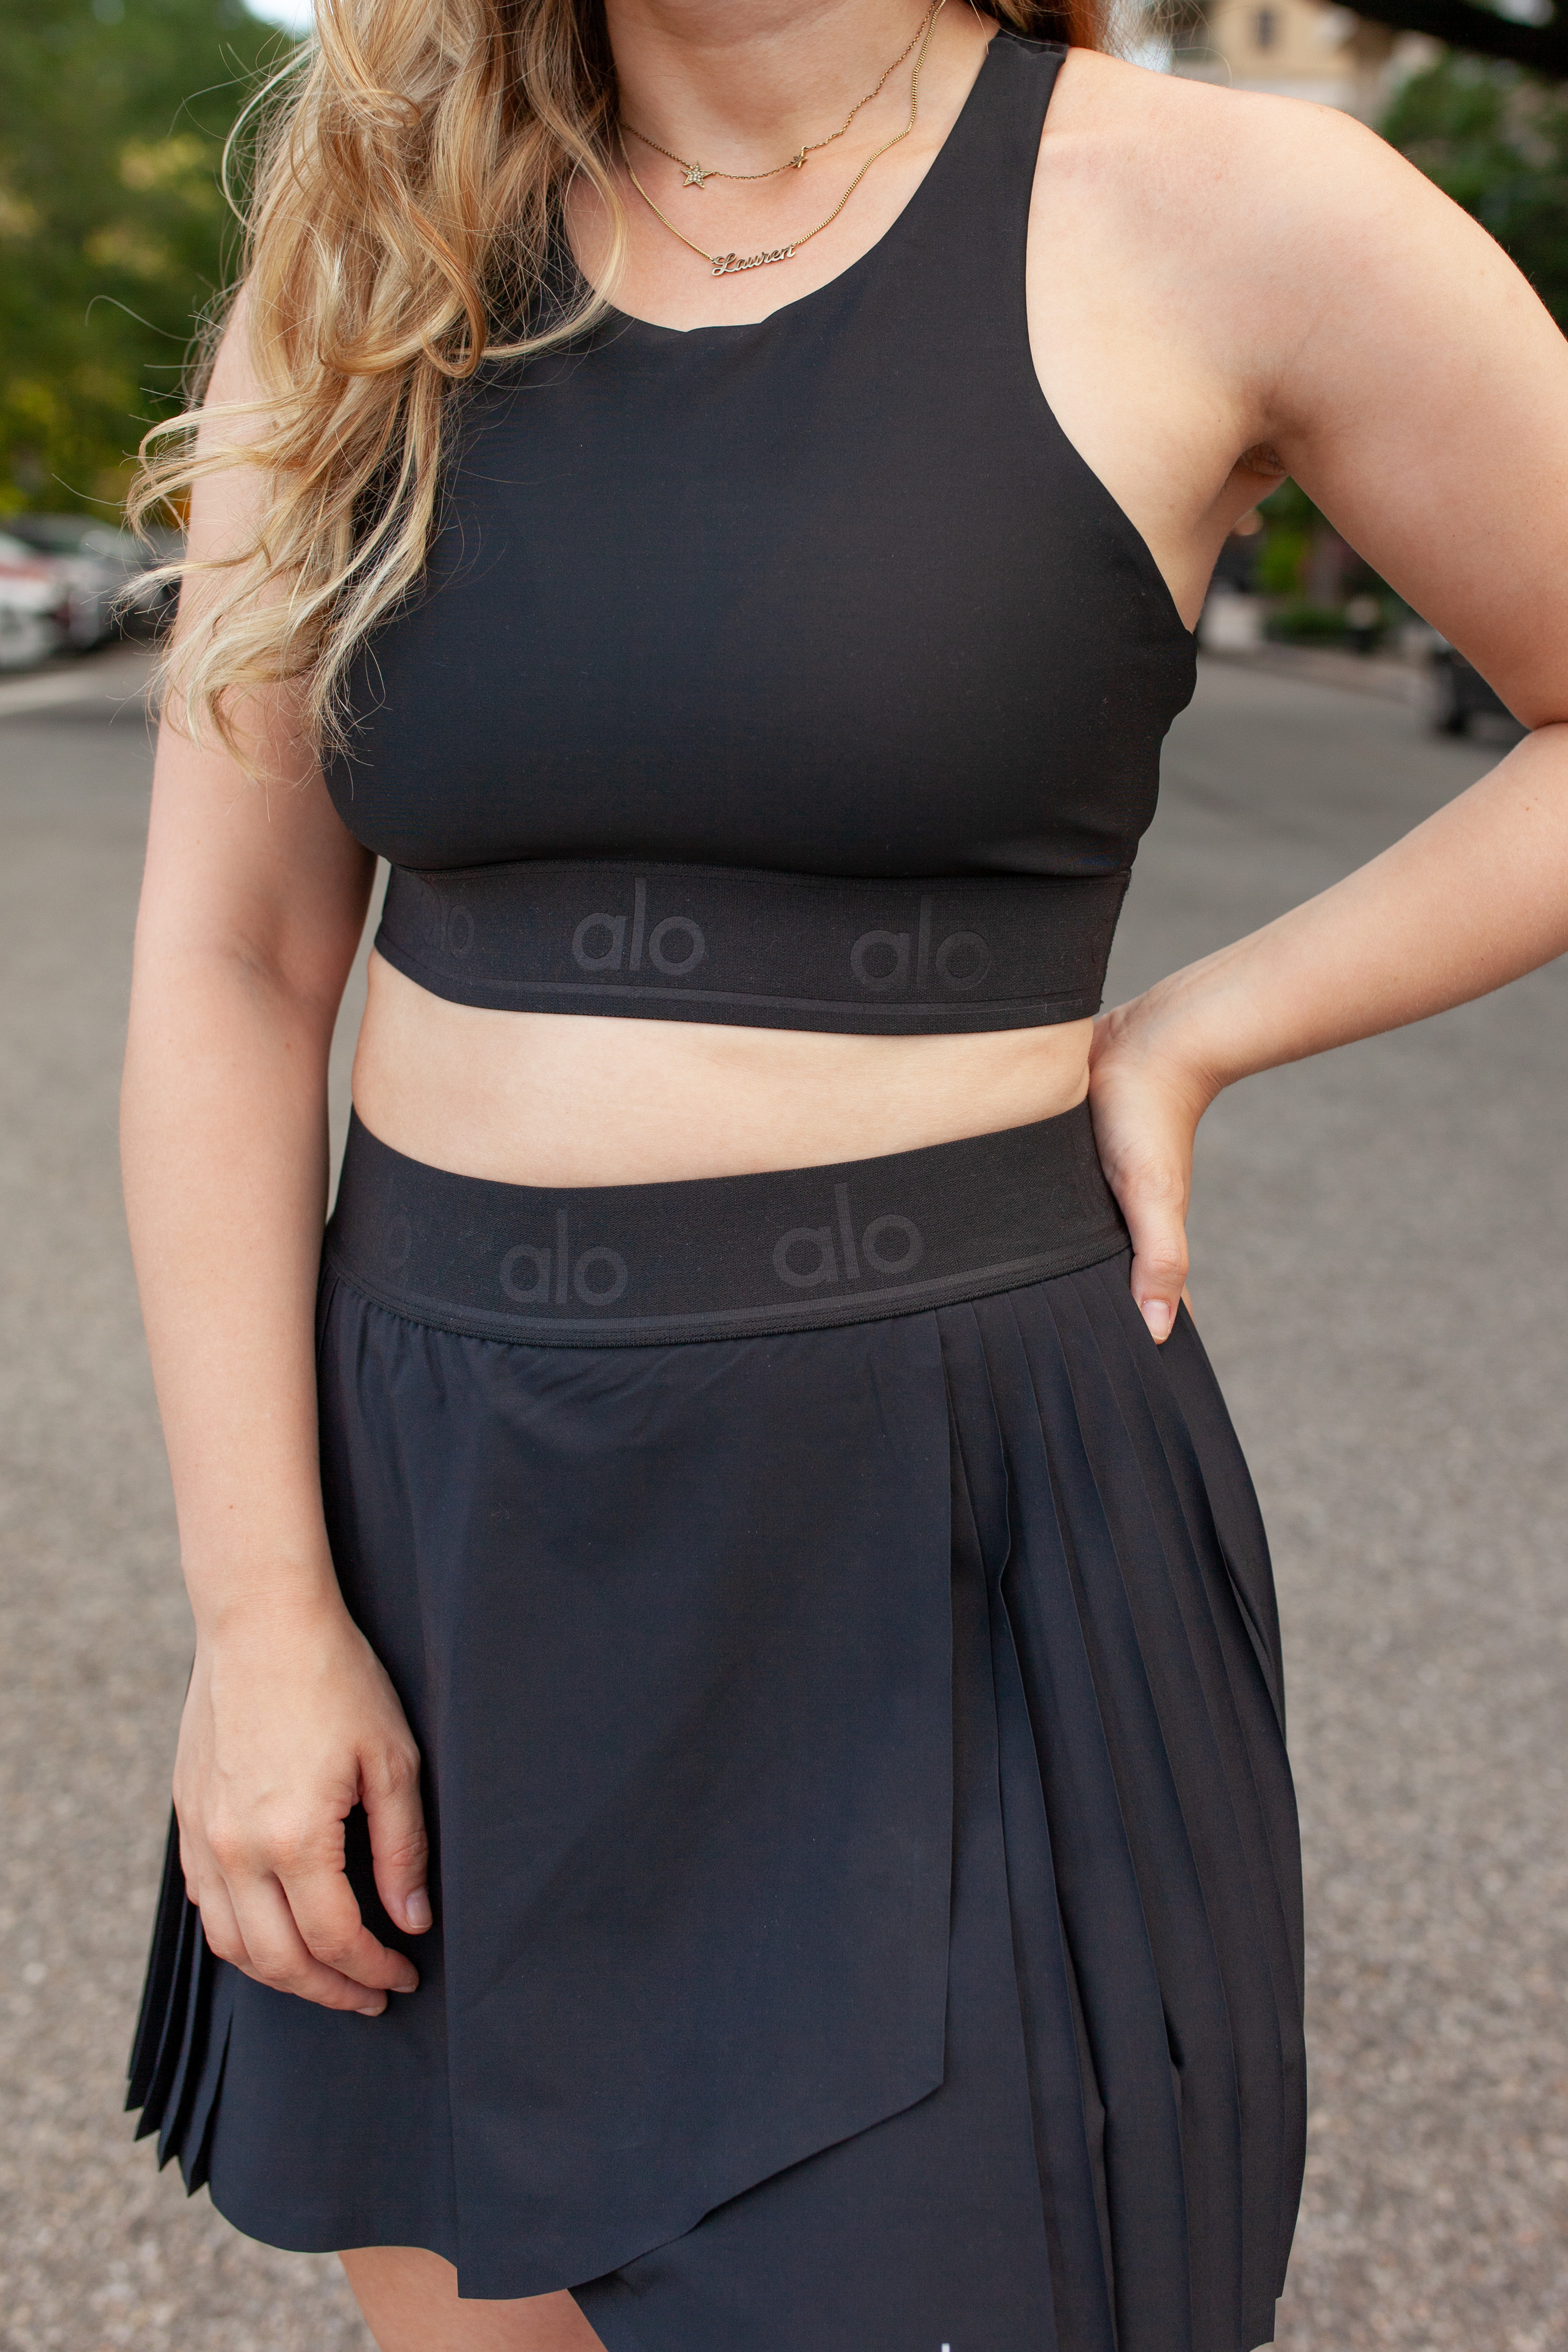 girl wearing black tennis skirt and sports bra from alo yoga